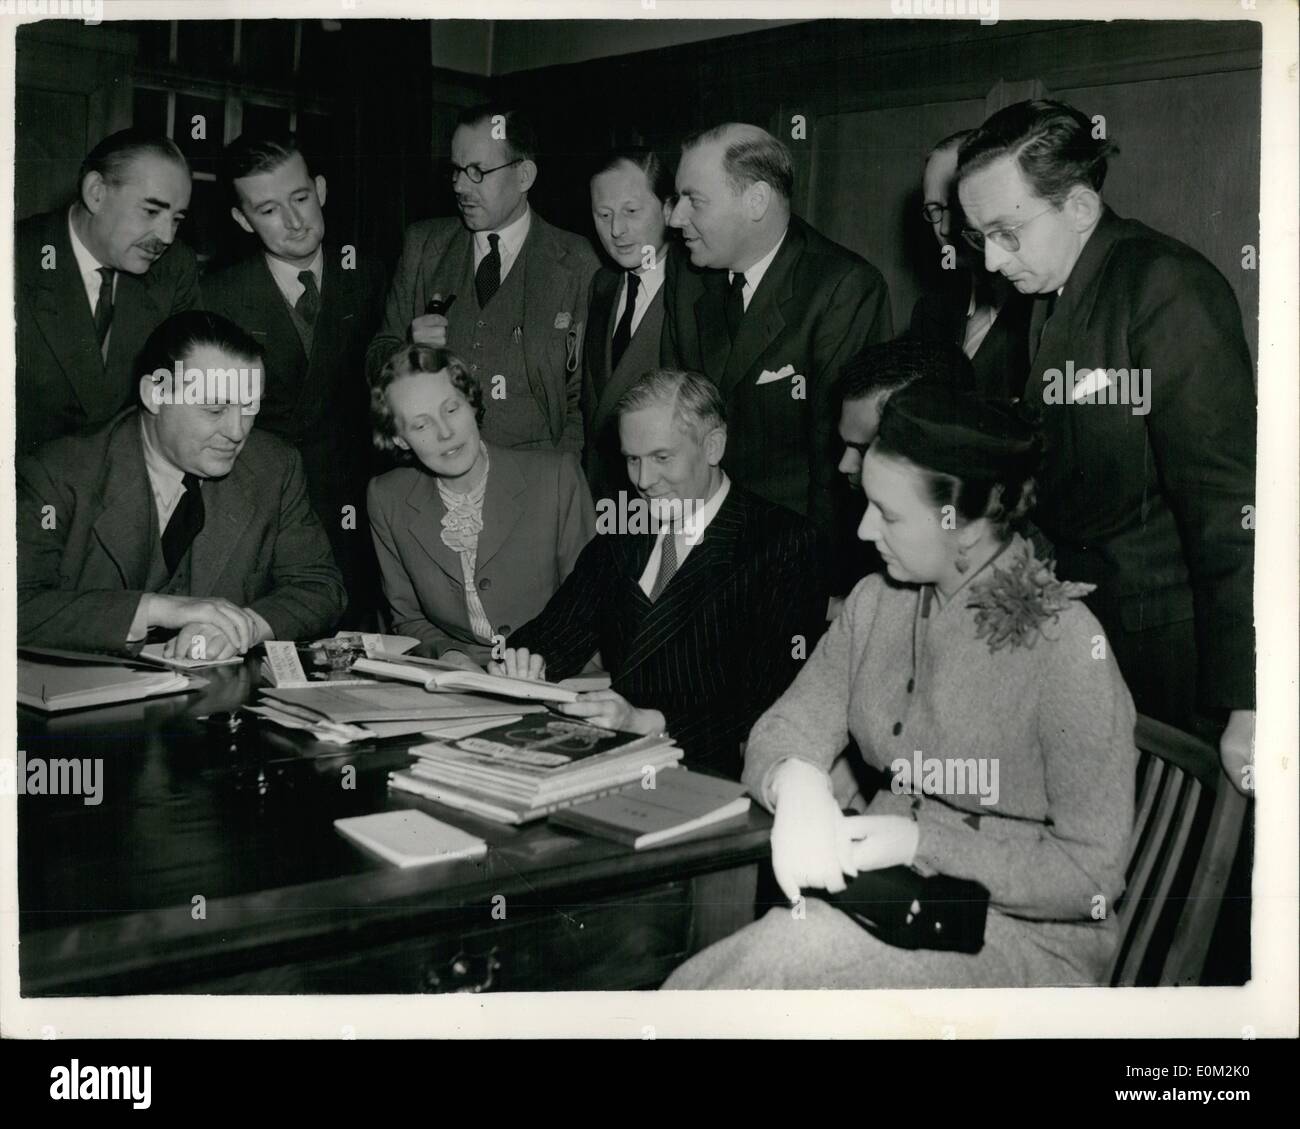 Apr. 04, 1953 - B.B.C. Commentators have Coronation Conference: The first conference of the B.B.C. Commentators who will take part in the Coronation broadcast - was held this evening at Broadcasting House. Photo shows (L to R) during the conference are (sitting): Howard Marshall; Audrey Russell; Max Muller, head of sound outside broadcast; Willie Richardson, and Jean Metcalfe. (standing) John Snagge, G. Tonkin, liaison assistant of outside broadcasting Dept.; Frank Anderson, Manager of outside broadcasting; Henry Riddell, Frank Gillard; Rex Austin and Allen Williams. Stock Photo